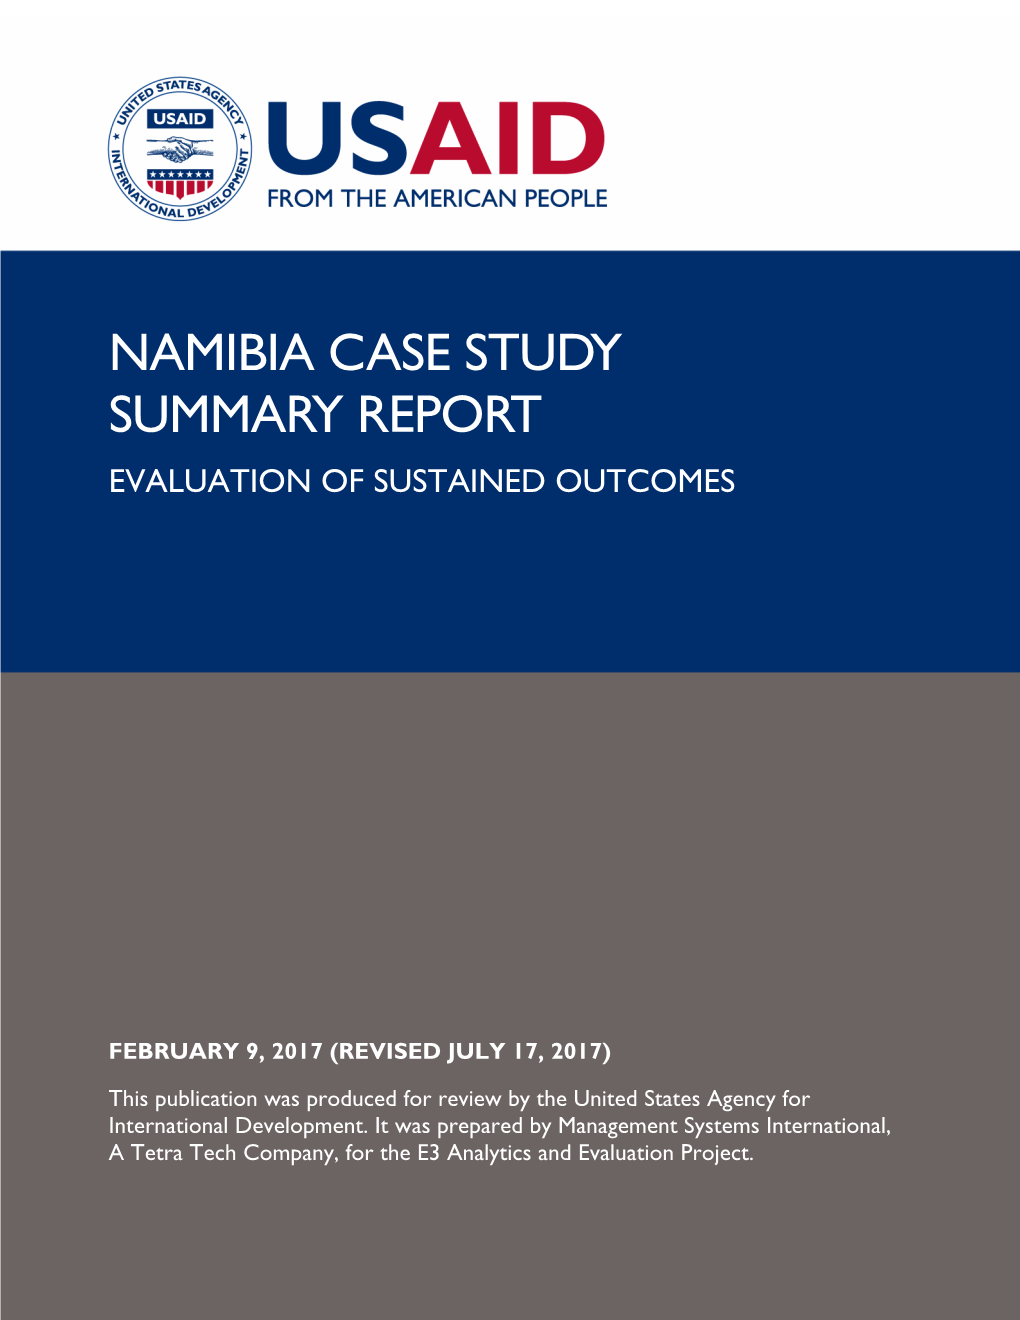 Namibia Case Study Summary Report Evaluation of Sustained Outcomes